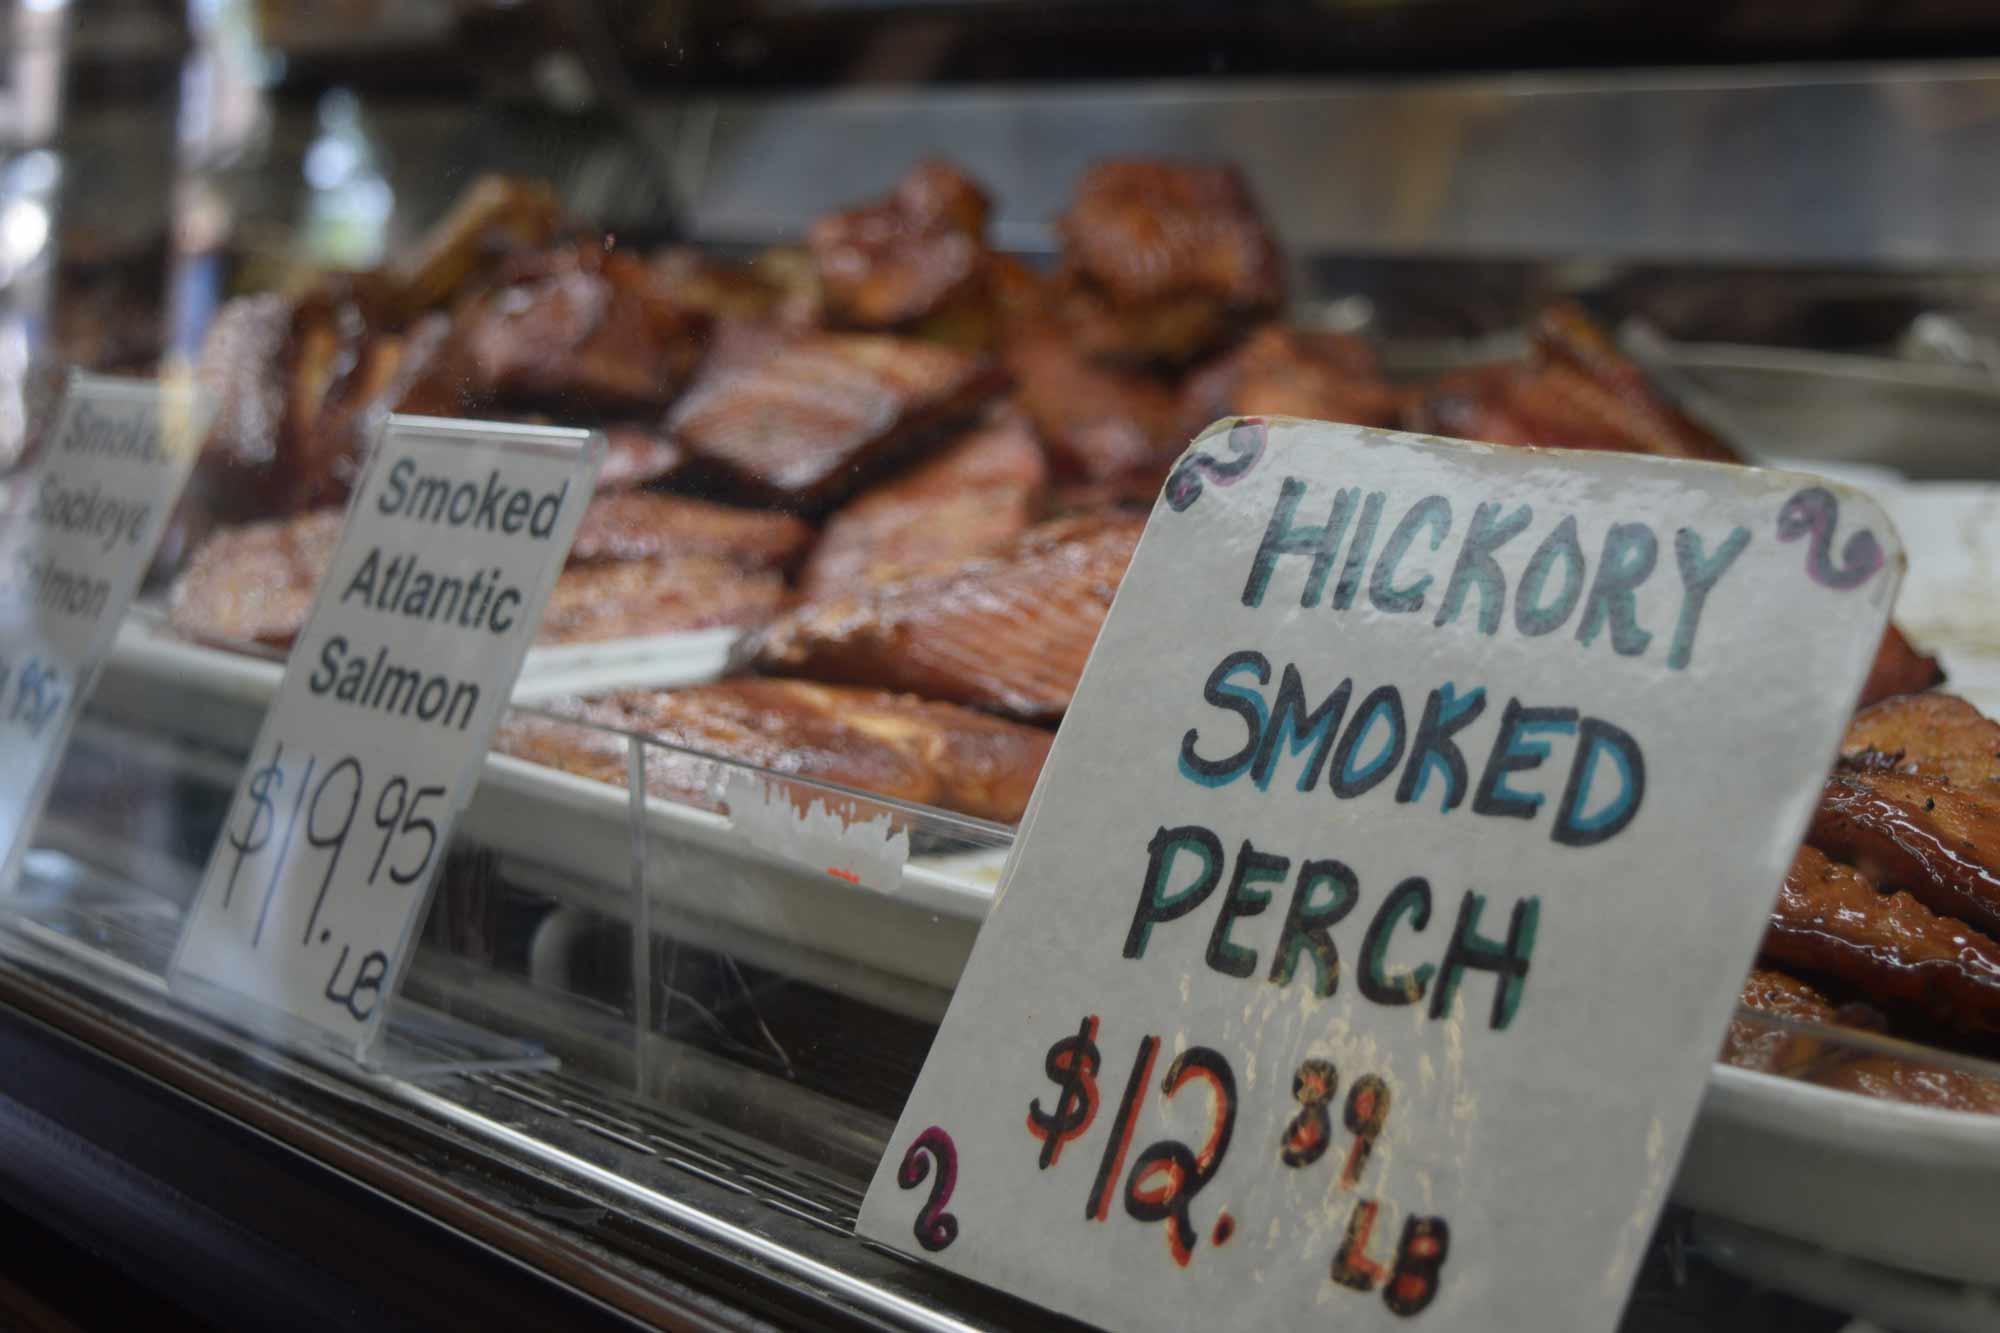 Handwritten sign in display case. Hickory smoked perch $12.89 per pound.